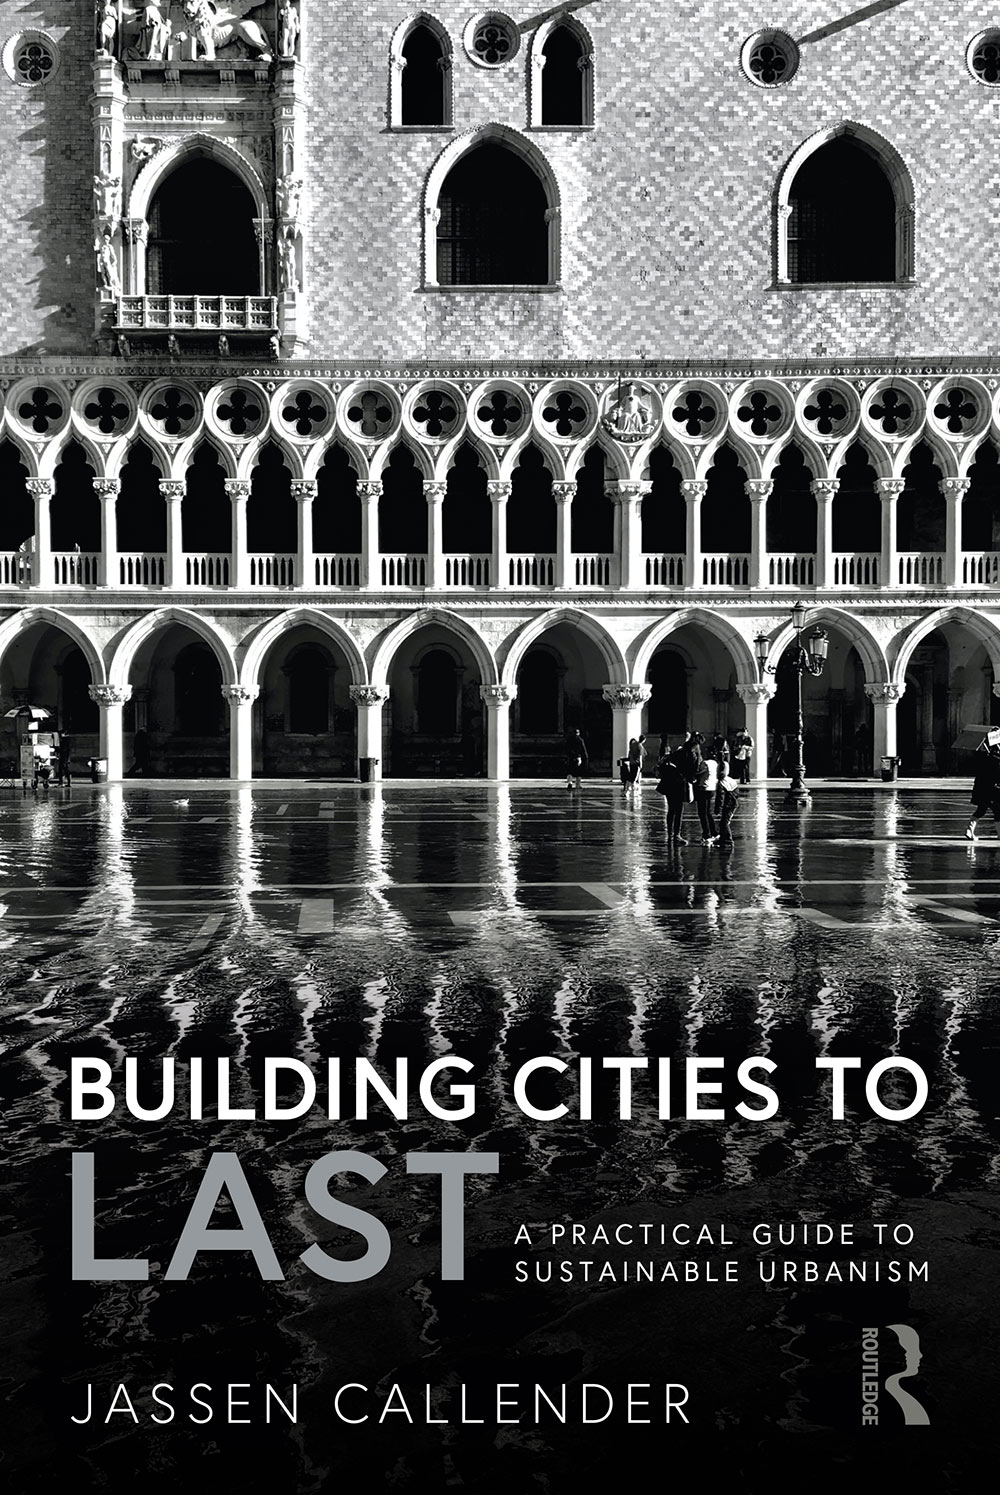 black and white book cover - shows close-up image of old building, title "Building Cities to LAST"